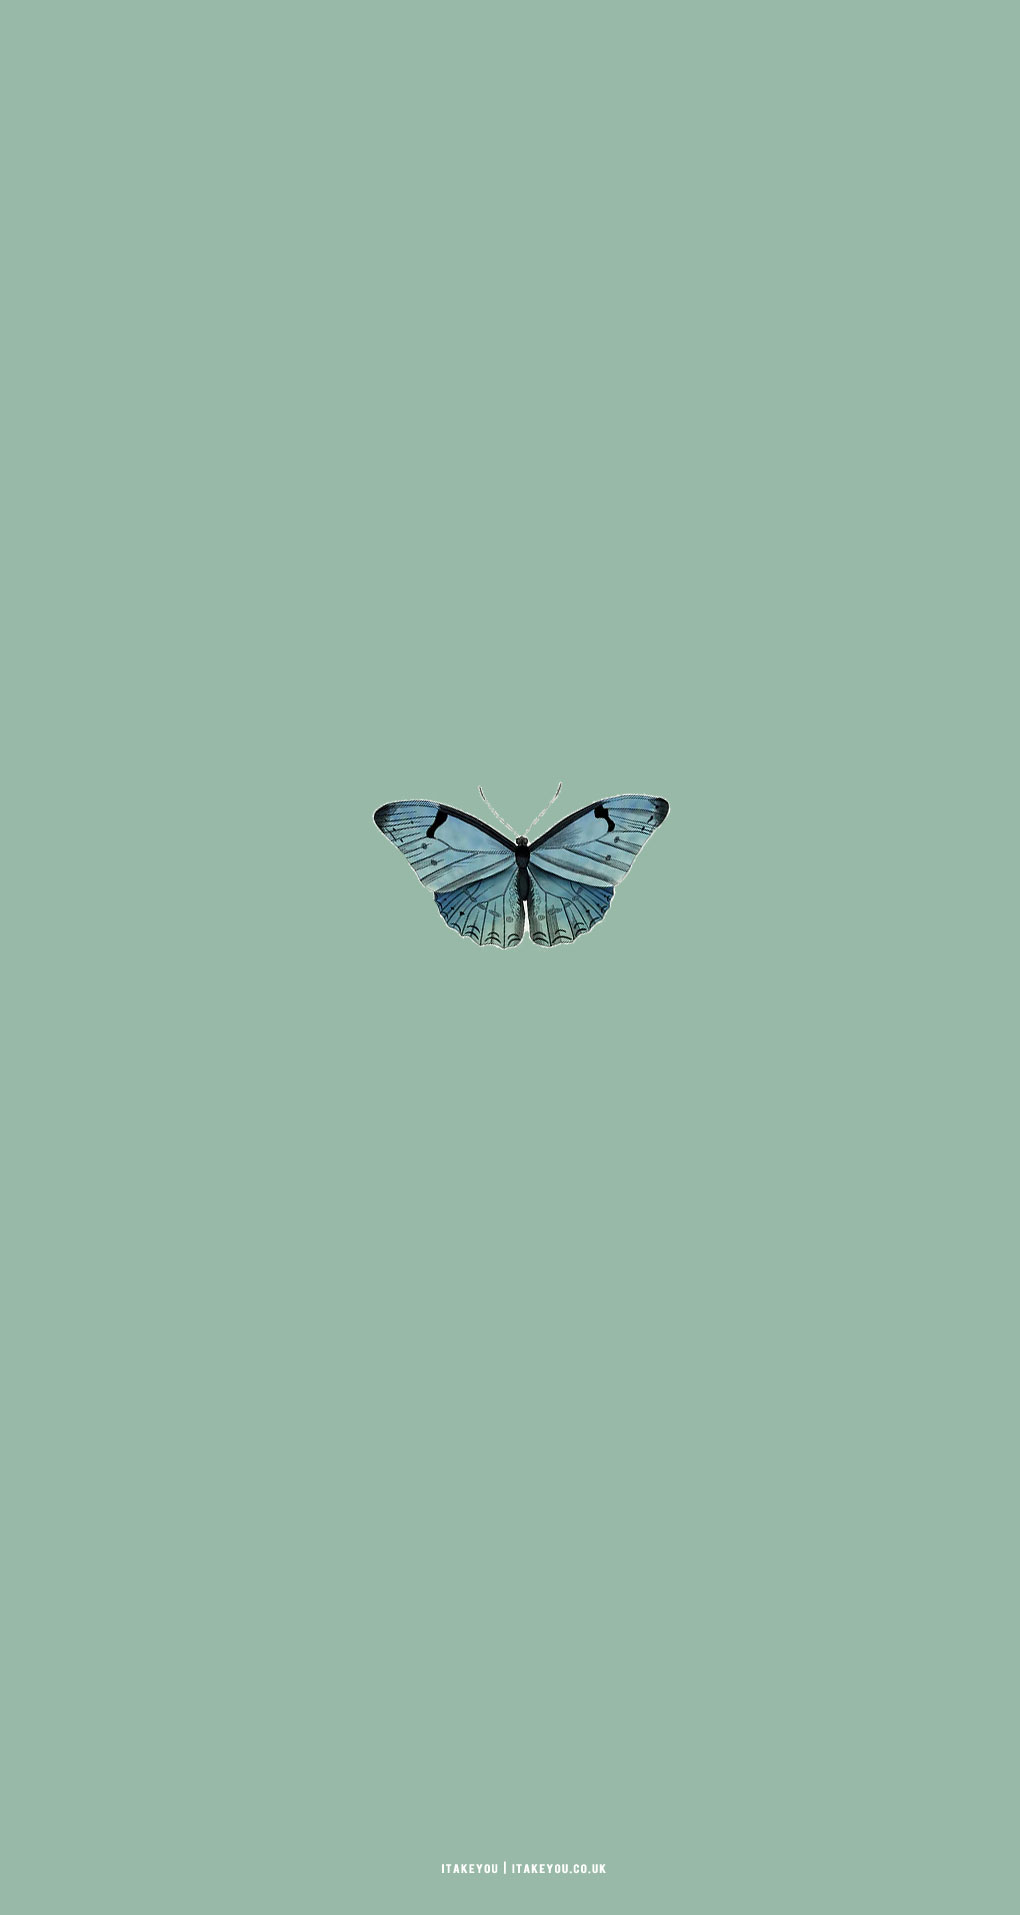 15 Sage Green Minimalist Wallpapers for Phone : A Butterfly